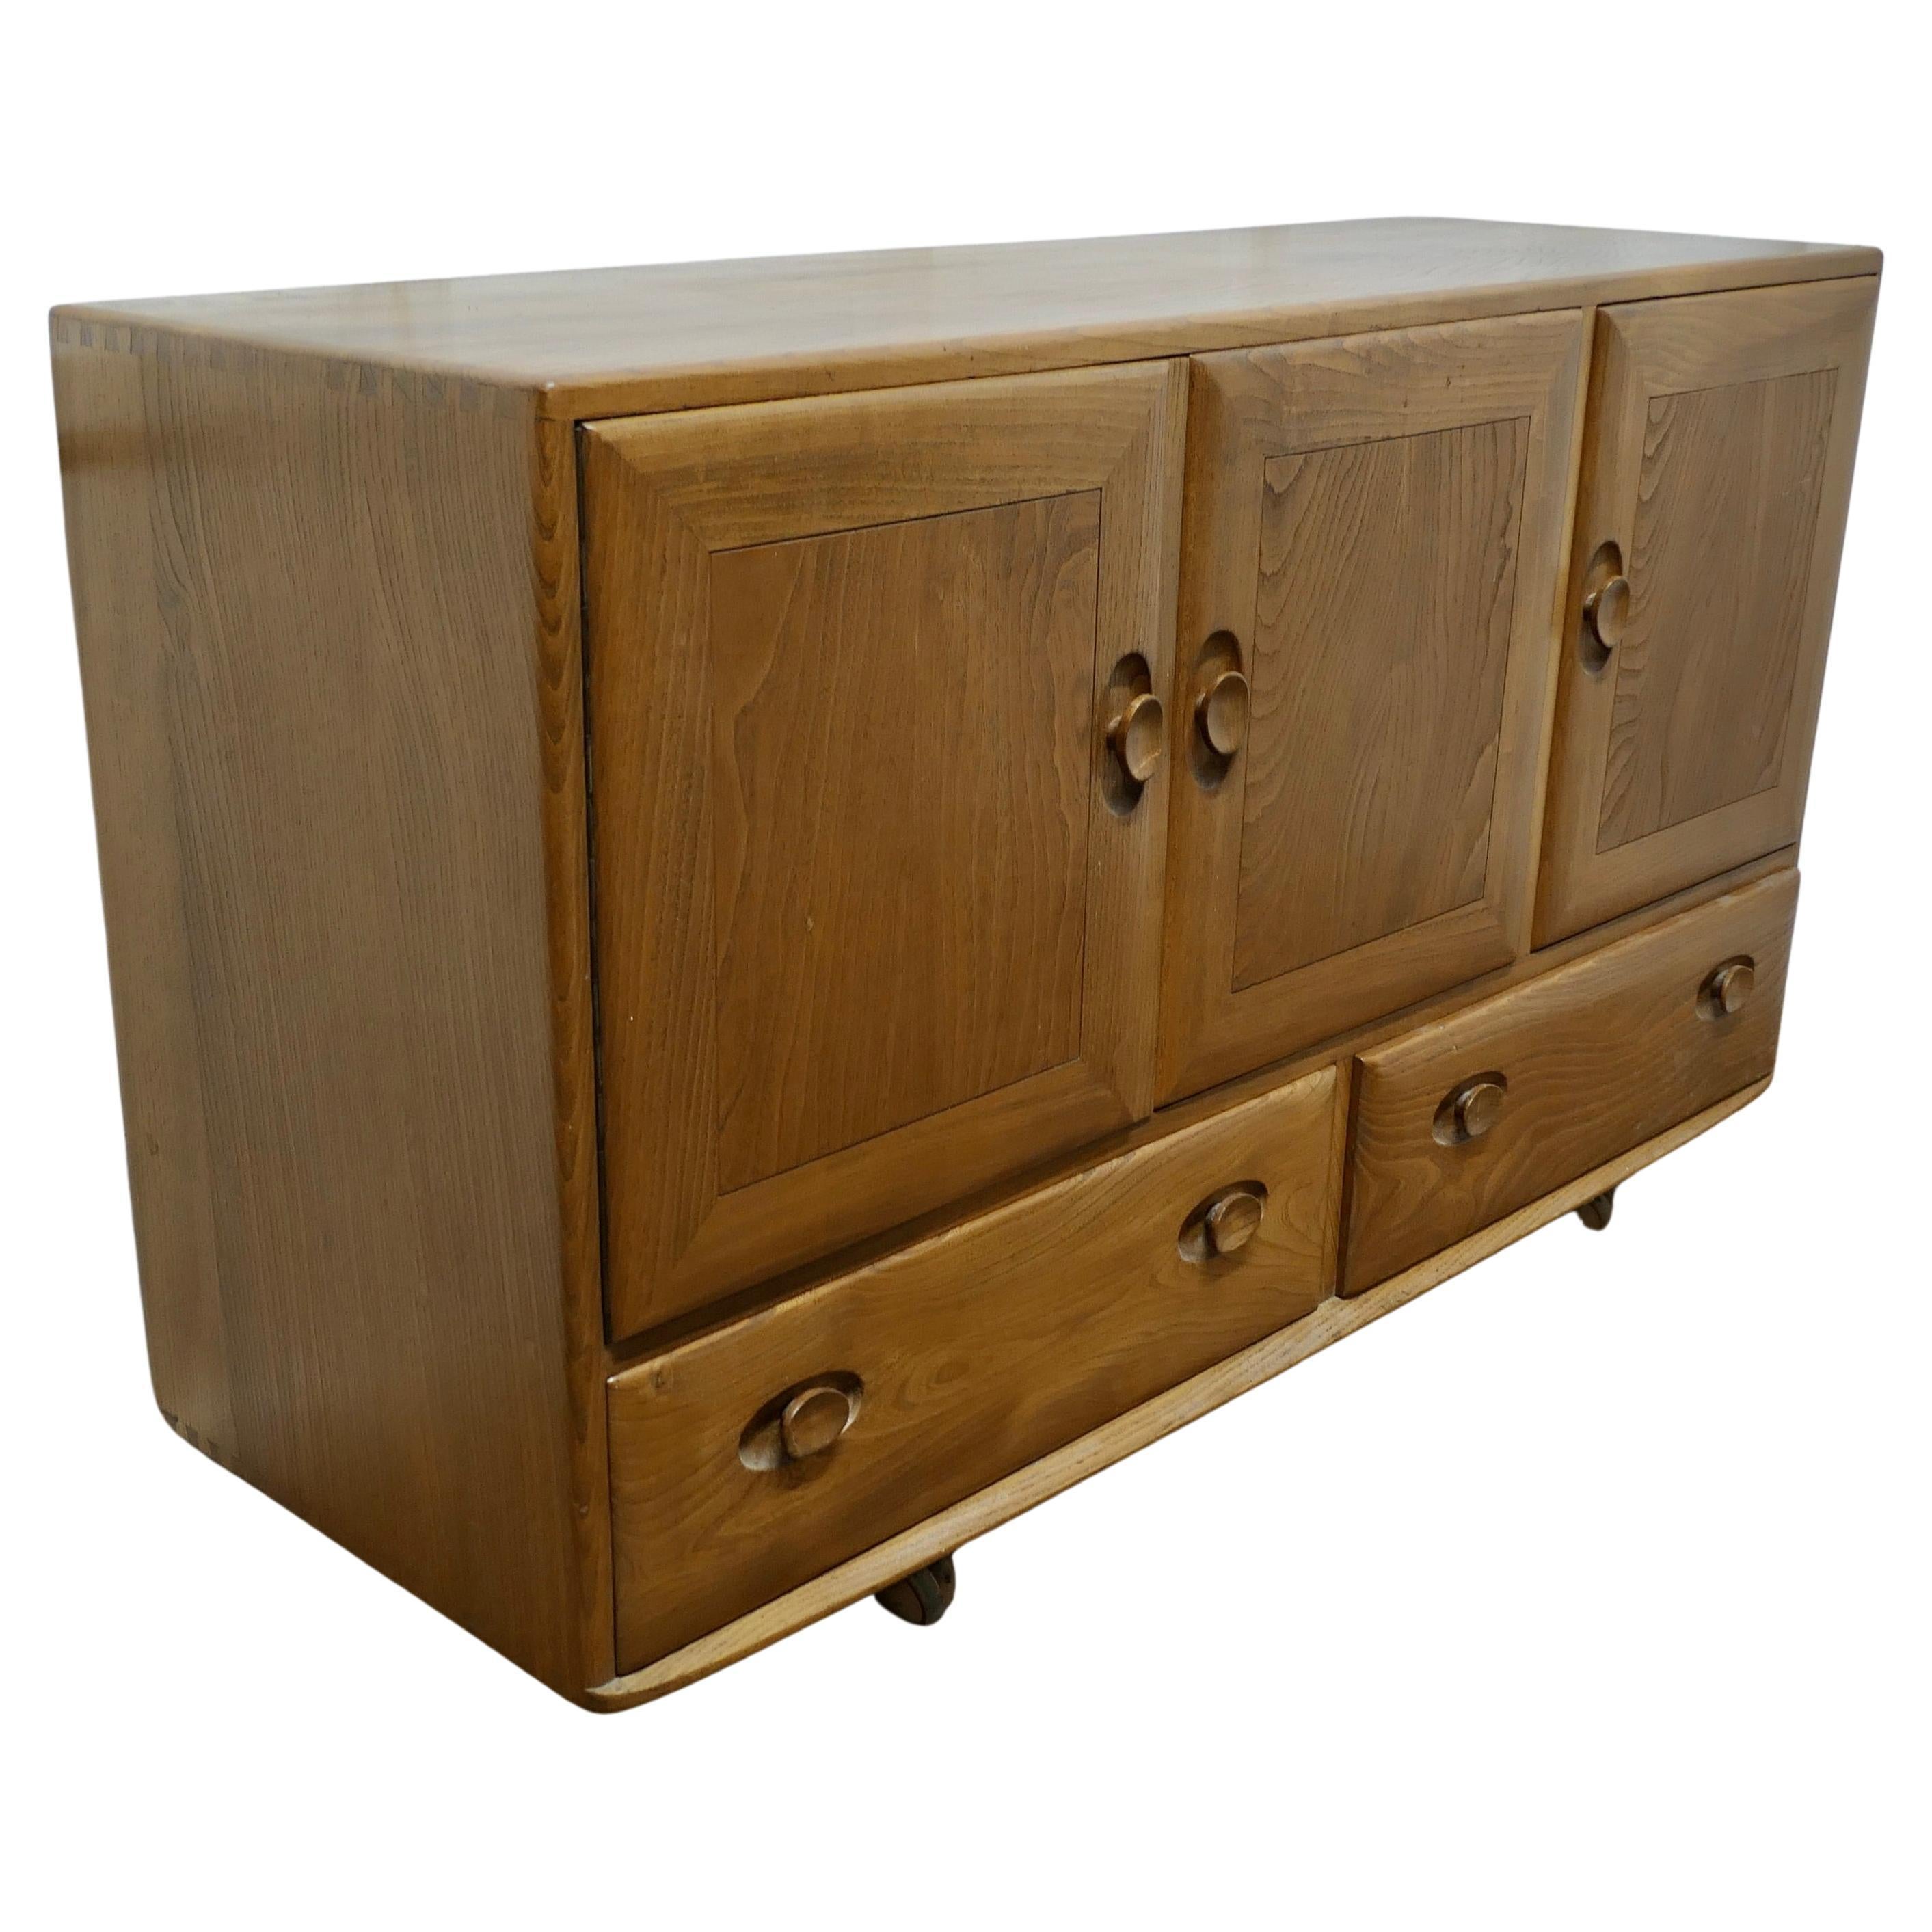 A Mid Century Golden Elm Sideboard by Ercol  The sideboard has 3 cupboard doors 